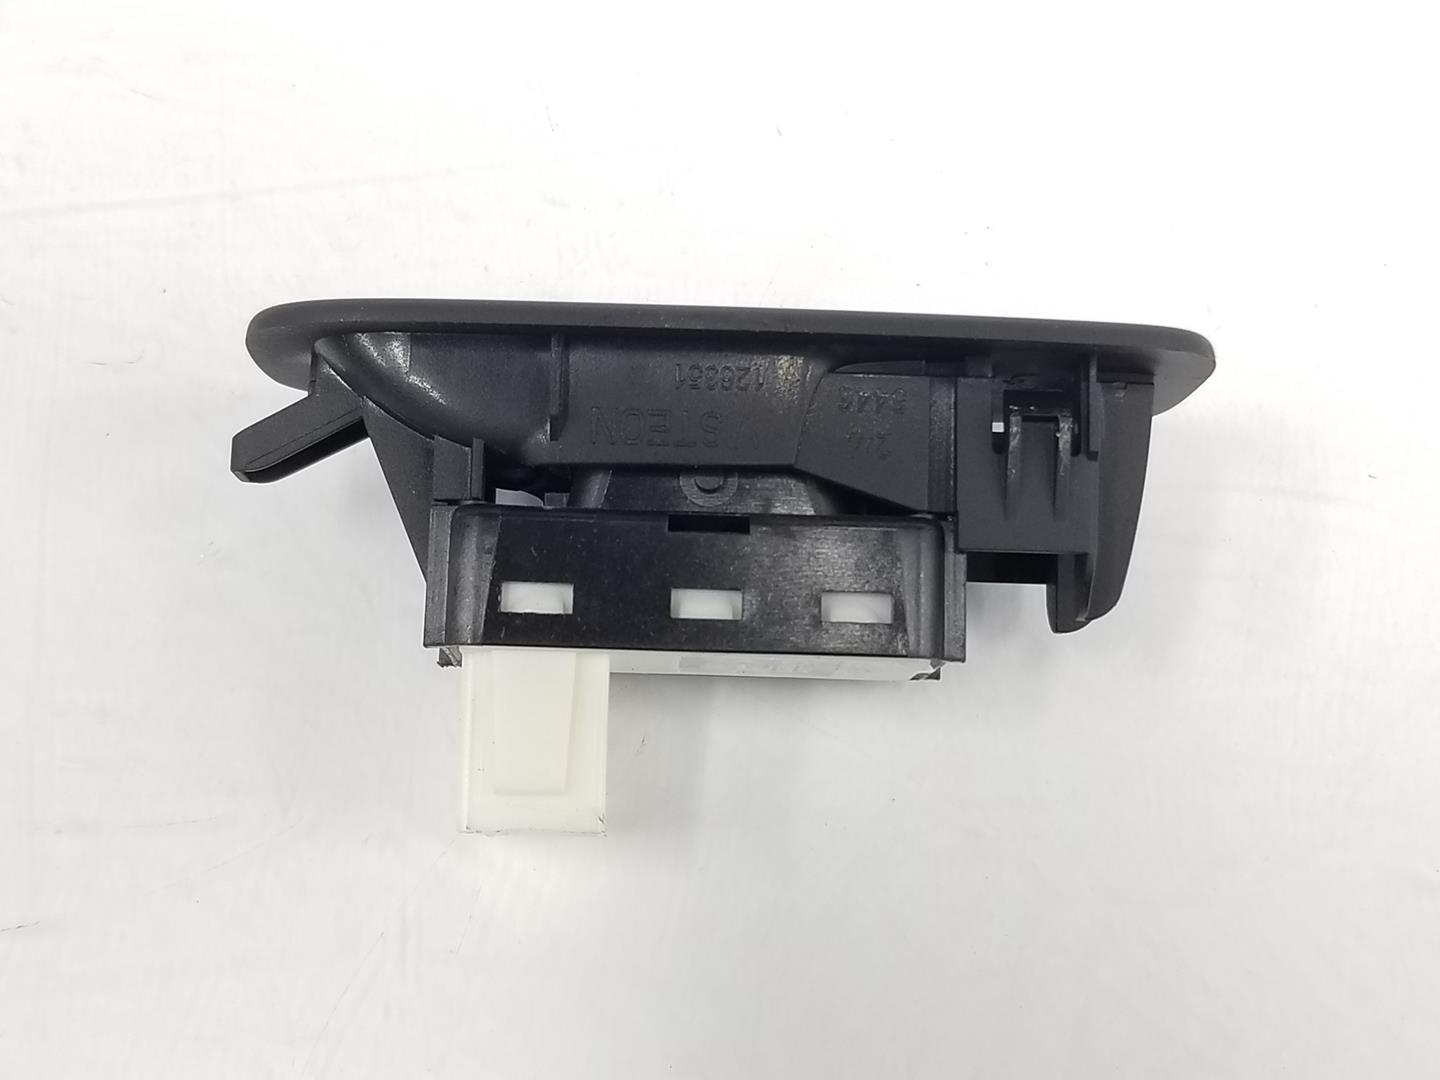 CITROËN C4 Picasso 2 generation (2013-2018) Rear Right Door Window Control Switch 98044803ZD, 96762292ZD 19788459